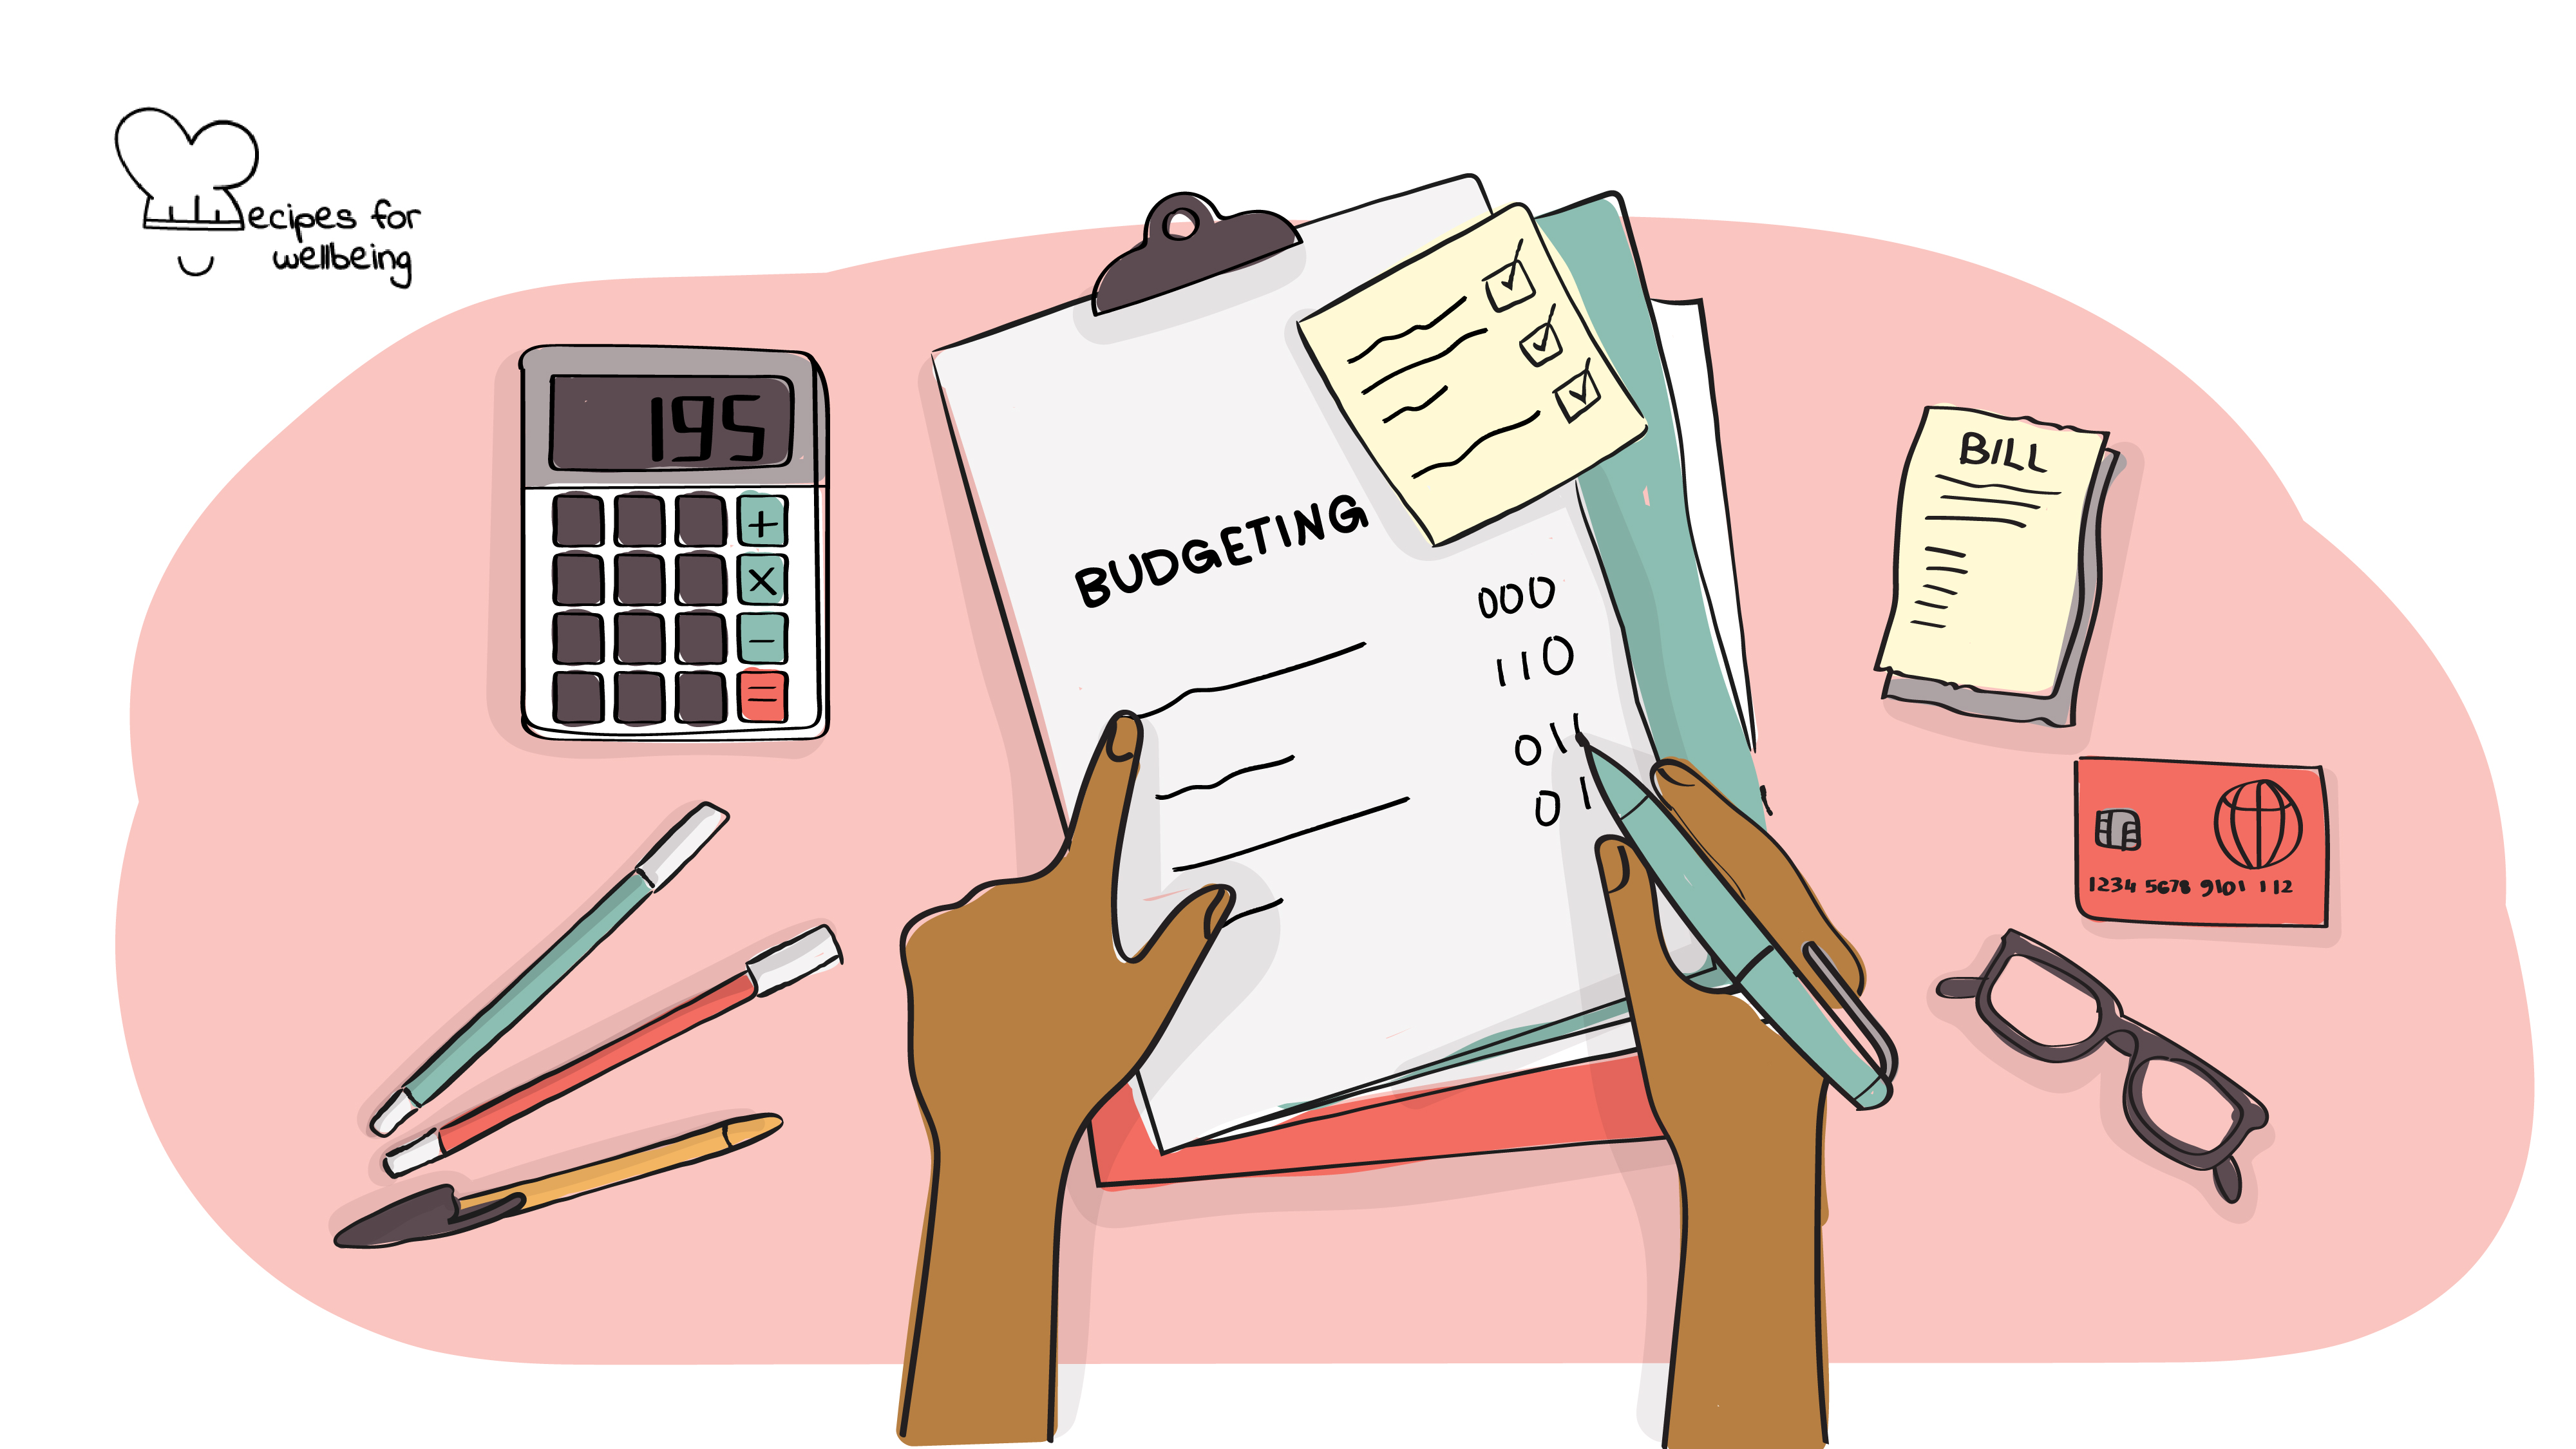 Illustration of a person's hand writing a budget on a sheet of paper (surrounded by the following items: a calculatore, a credit card, a pair of glasses, and a receipt). © Recipes for Wellbeing